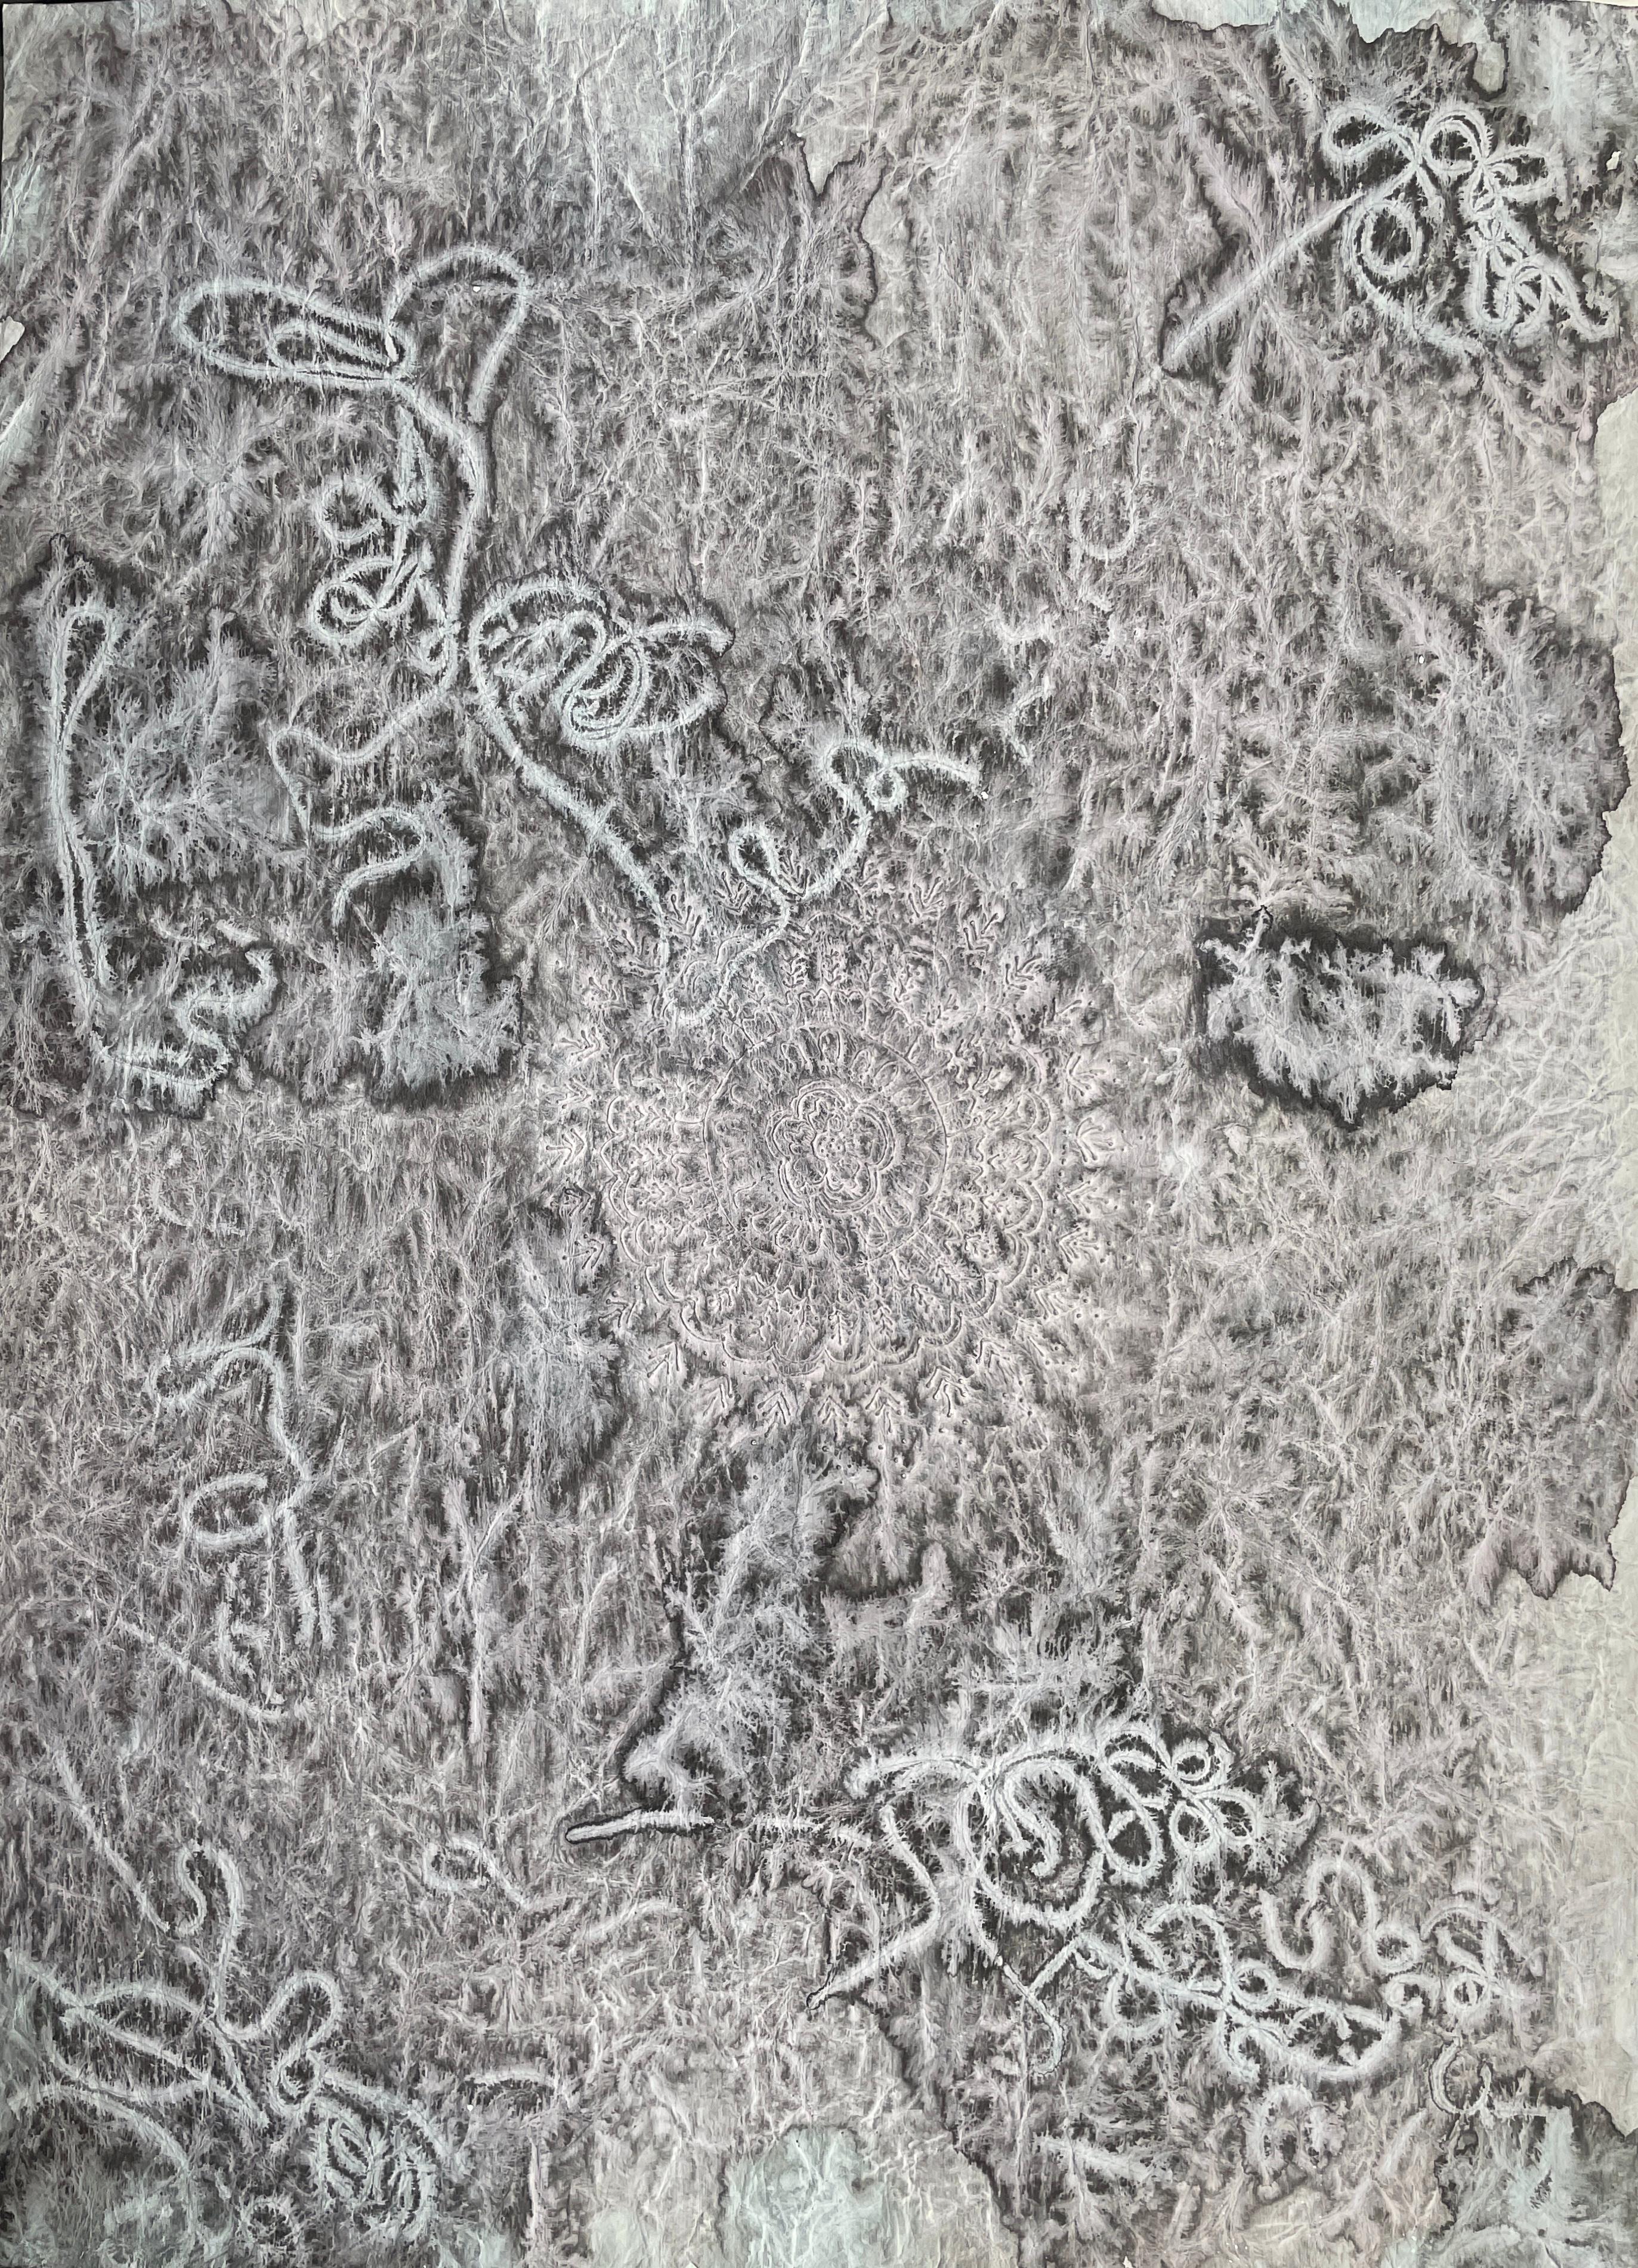 Antonio Puri Abstract Painting - Cincuenta 4: sumi ink painting on handmade paper from India w/ circle medallion